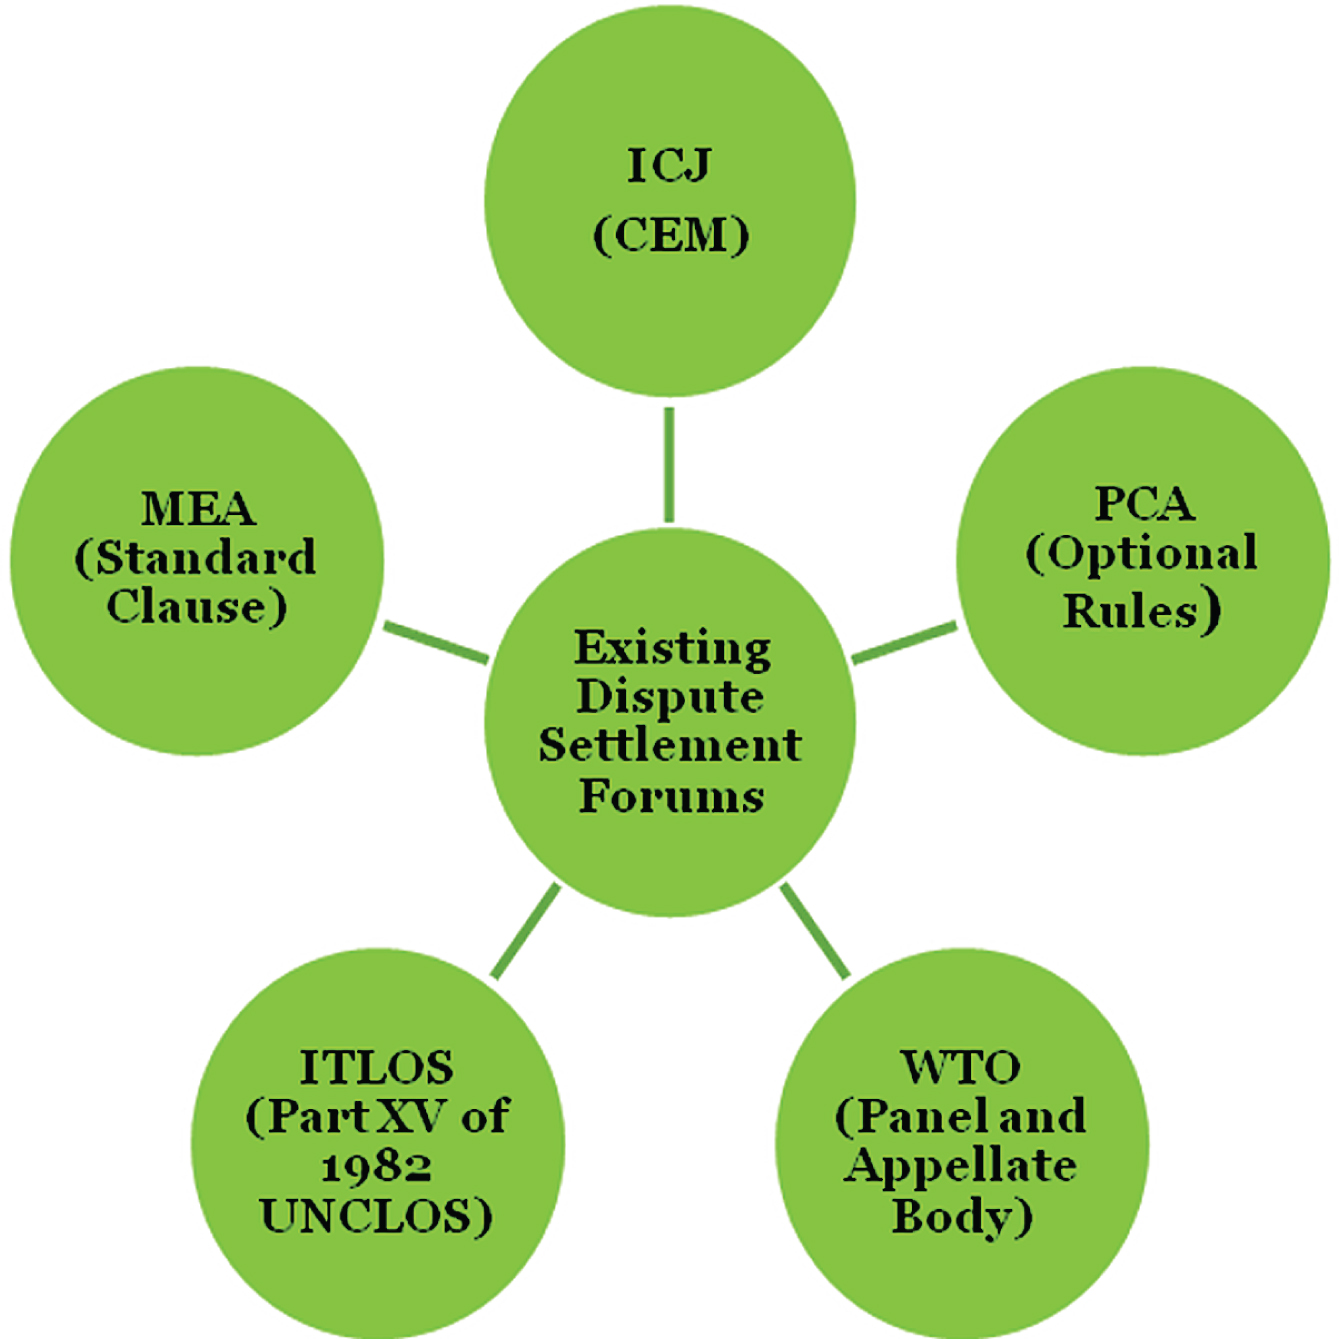 Existing forums for international environmental dispute settlement. [“Standard clause” refers to the standard dispute settlement clauses found in many MEAs; “CEM” refers to the ICJ’s Chamber for Environmental Matters. Ed.].